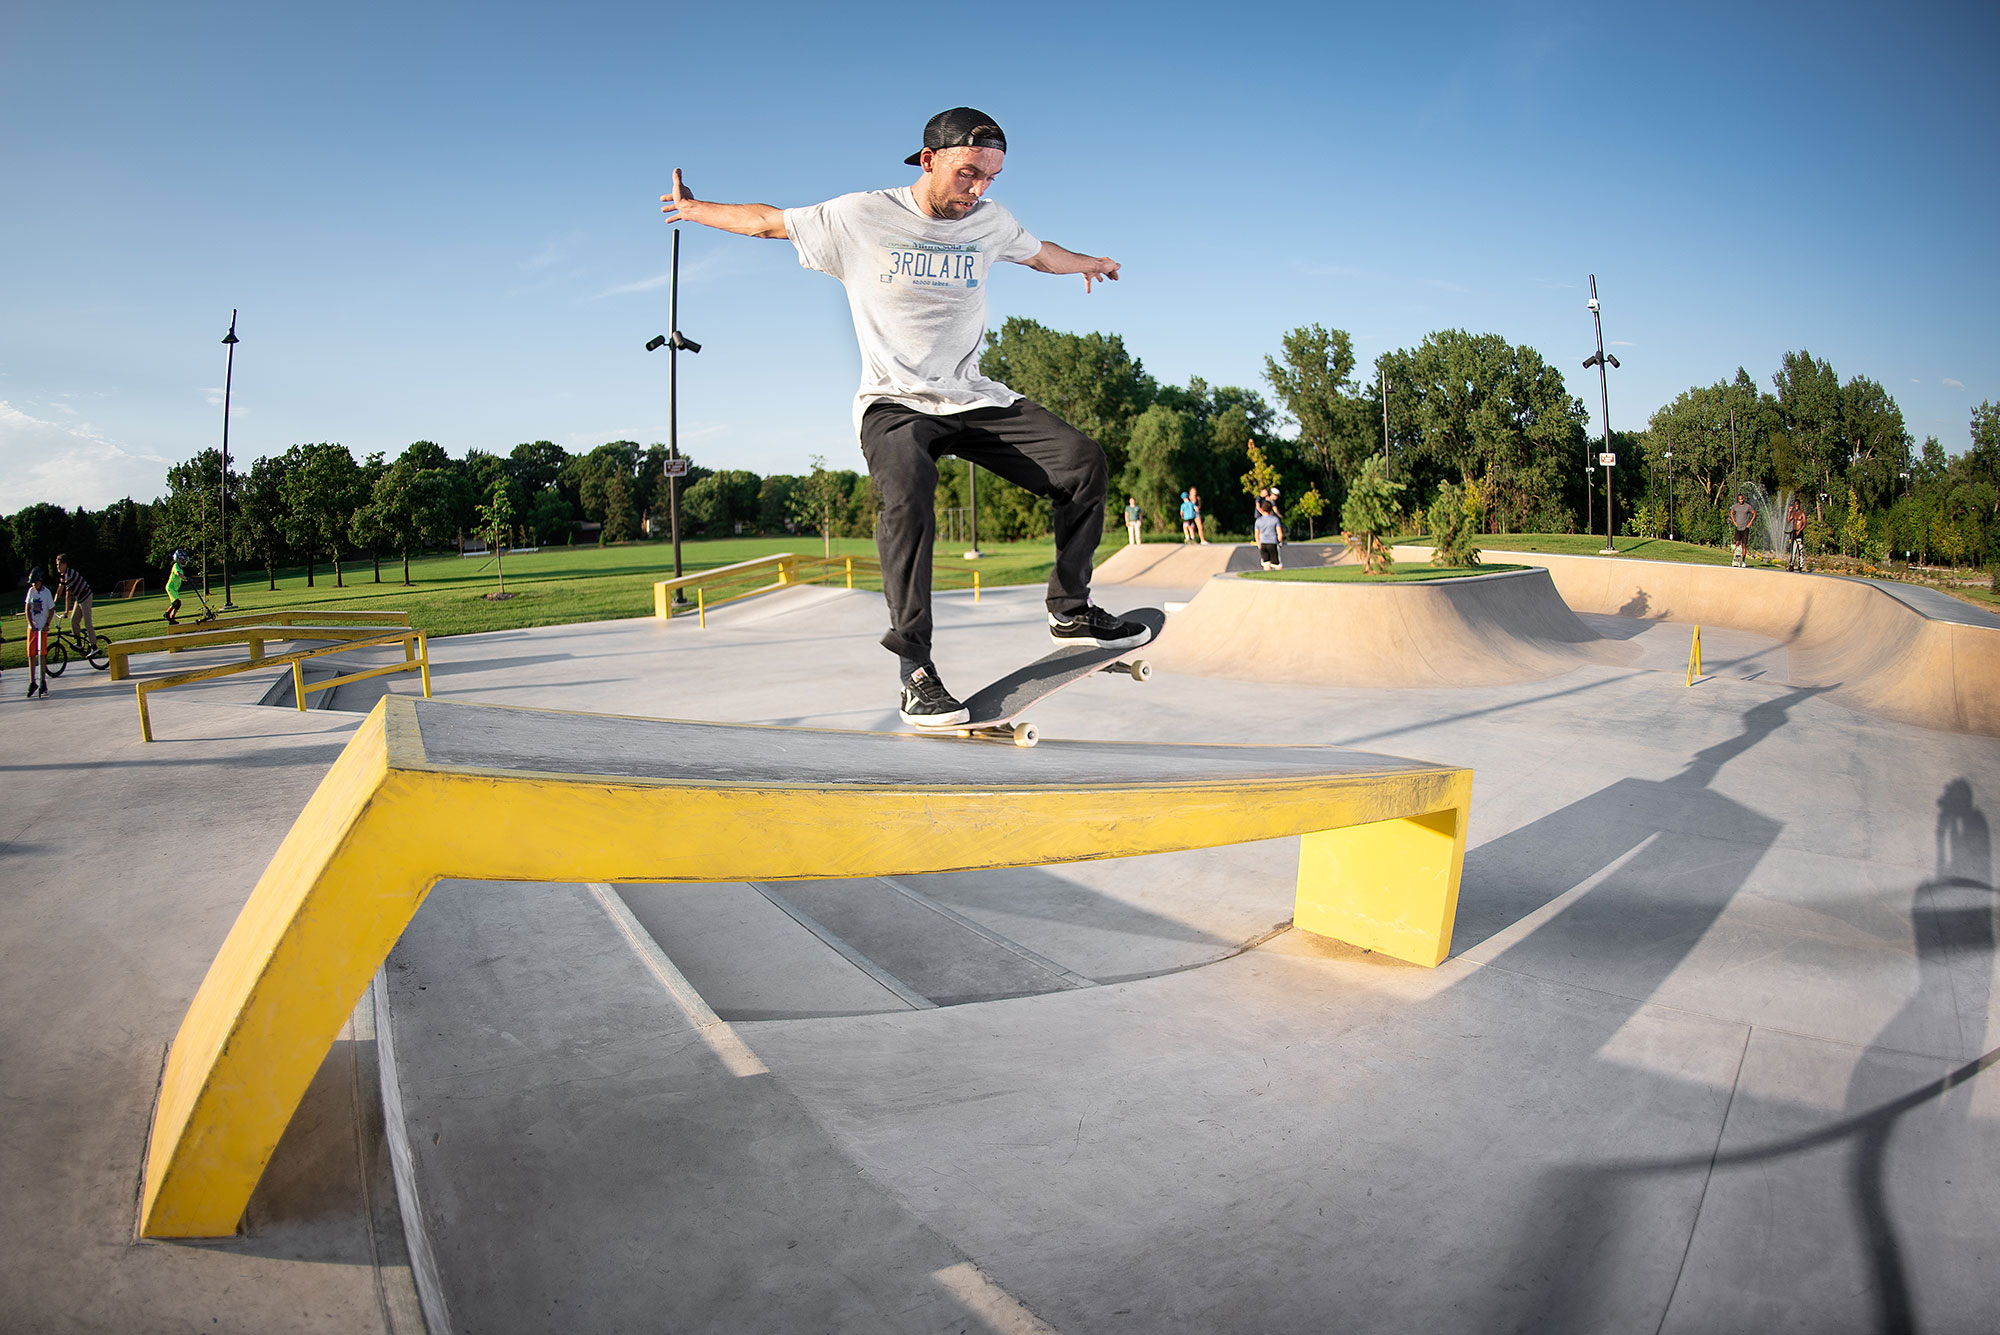 Buttery switch 5.0 at Shoreview Skatepark